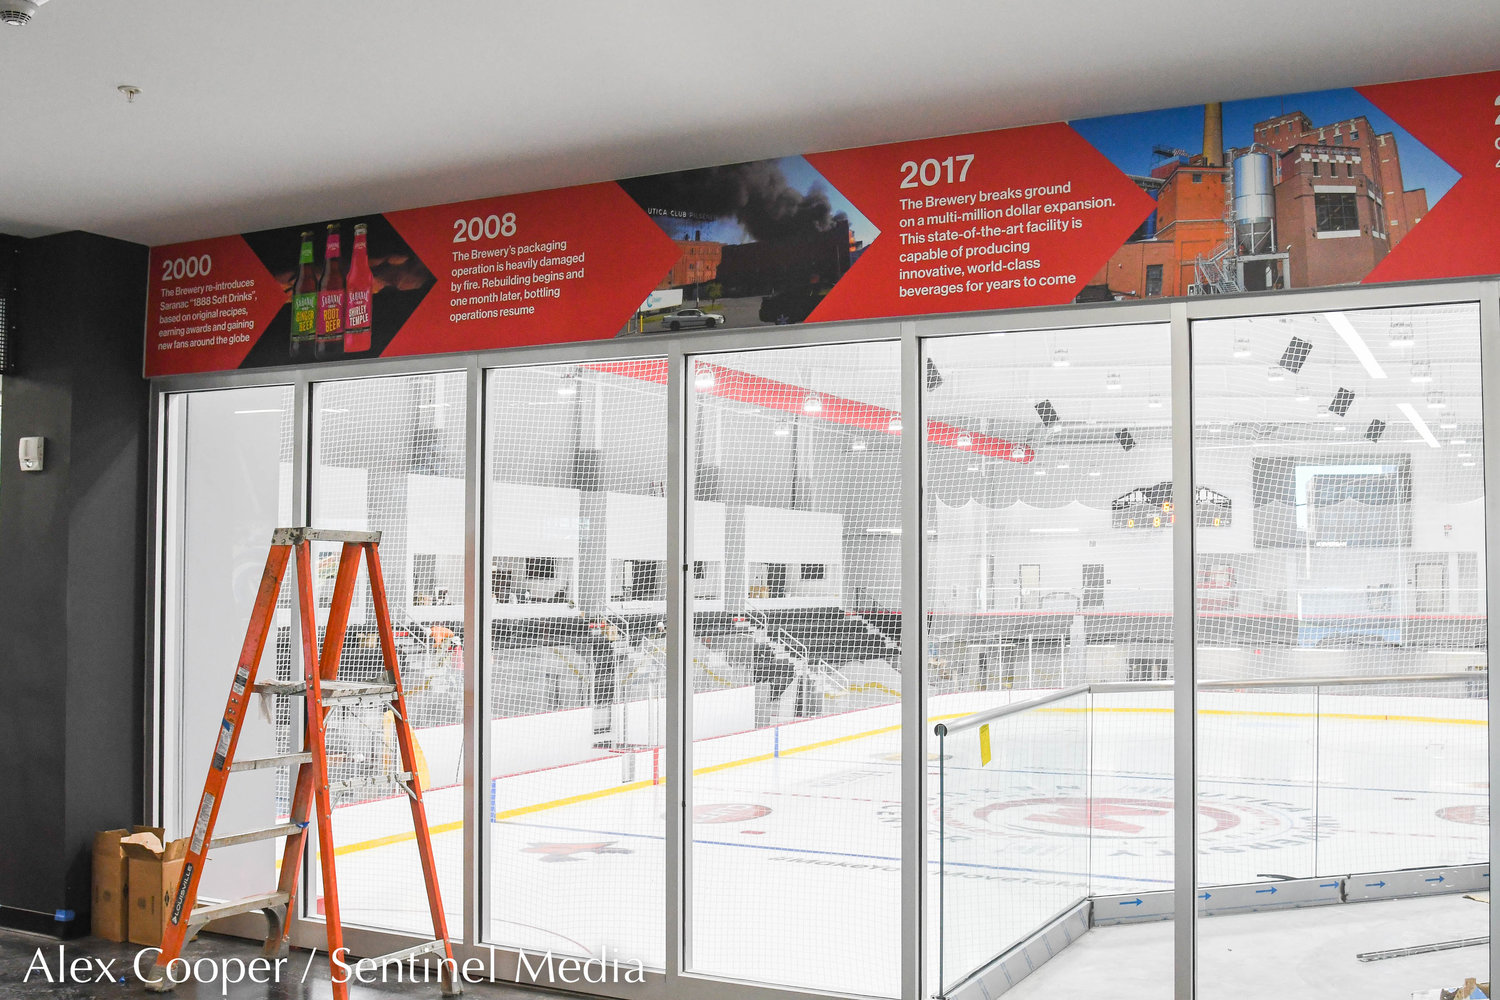 Finishing touches are applied inside the Nexus Center on Wednesday, Nov. 9 in Utica. The inaugural game will take place tonight between the NCDC Utica Jr. Comets and the Mercer Chiefs. The first tournament will take place from Nov. 11 to 13 for youth hockey teams.